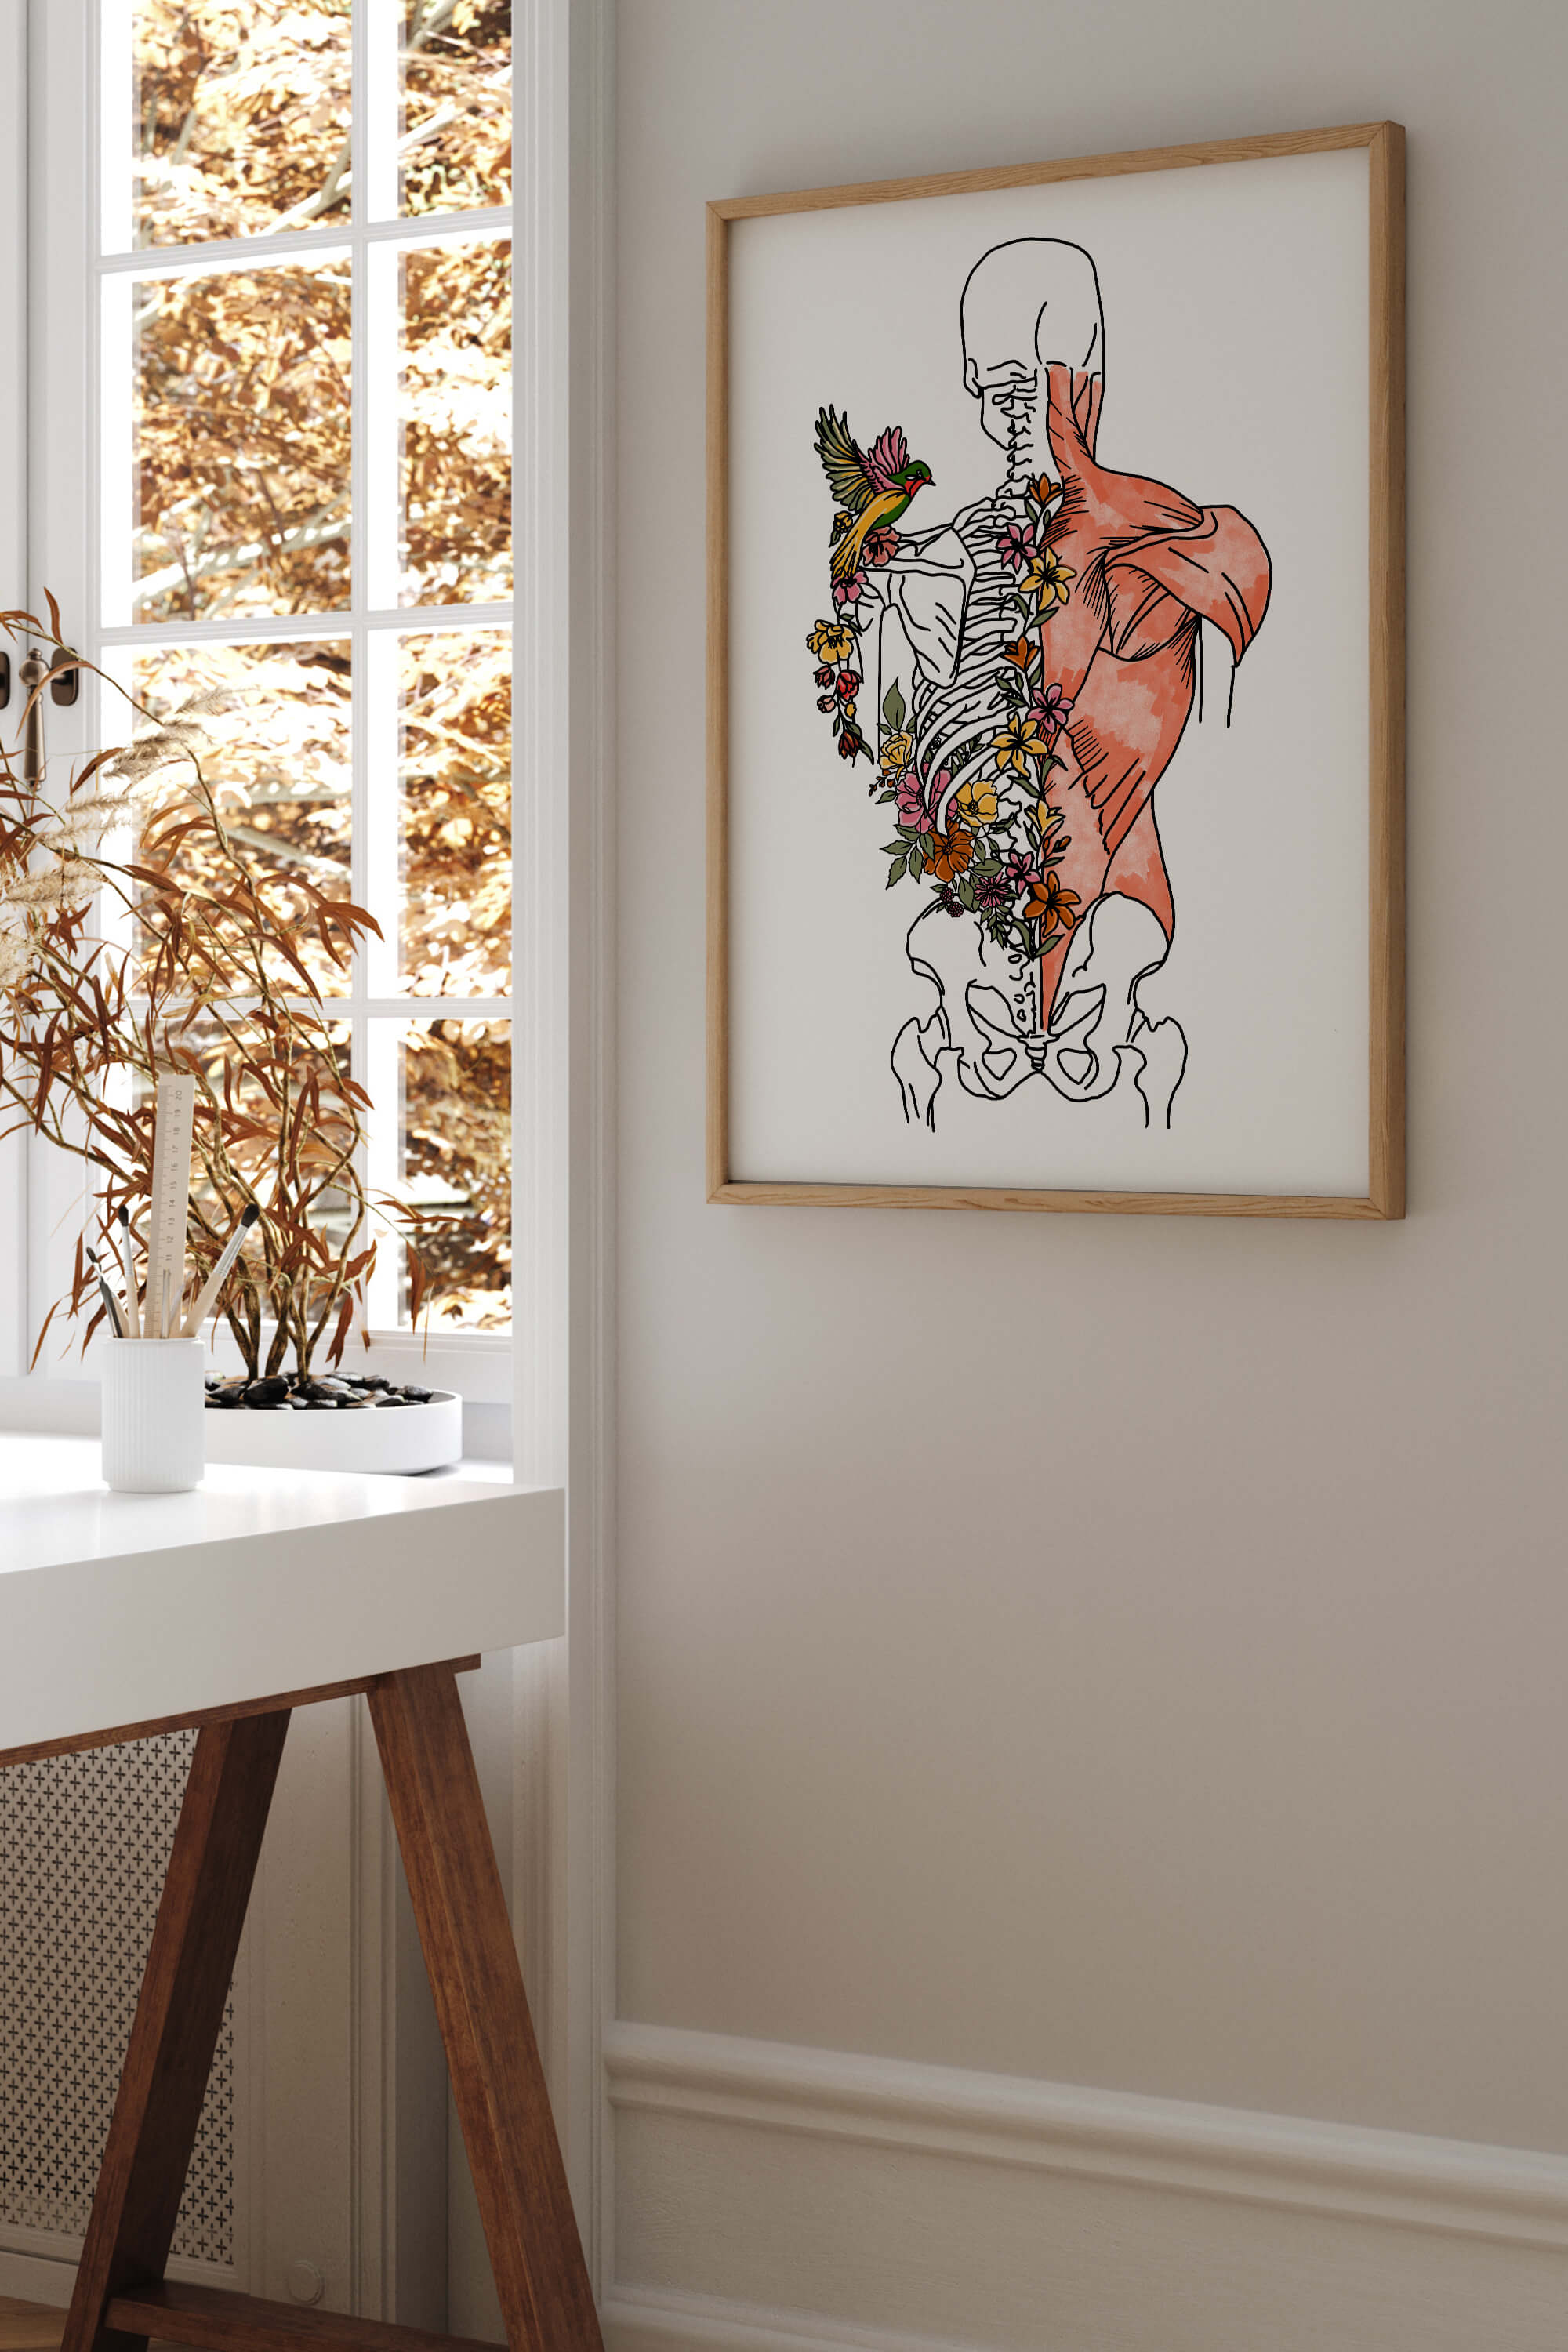 Unique Anatomical Muscle Decor featuring colorful floral accents, an ideal present for health professionals and gym enthusiasts.